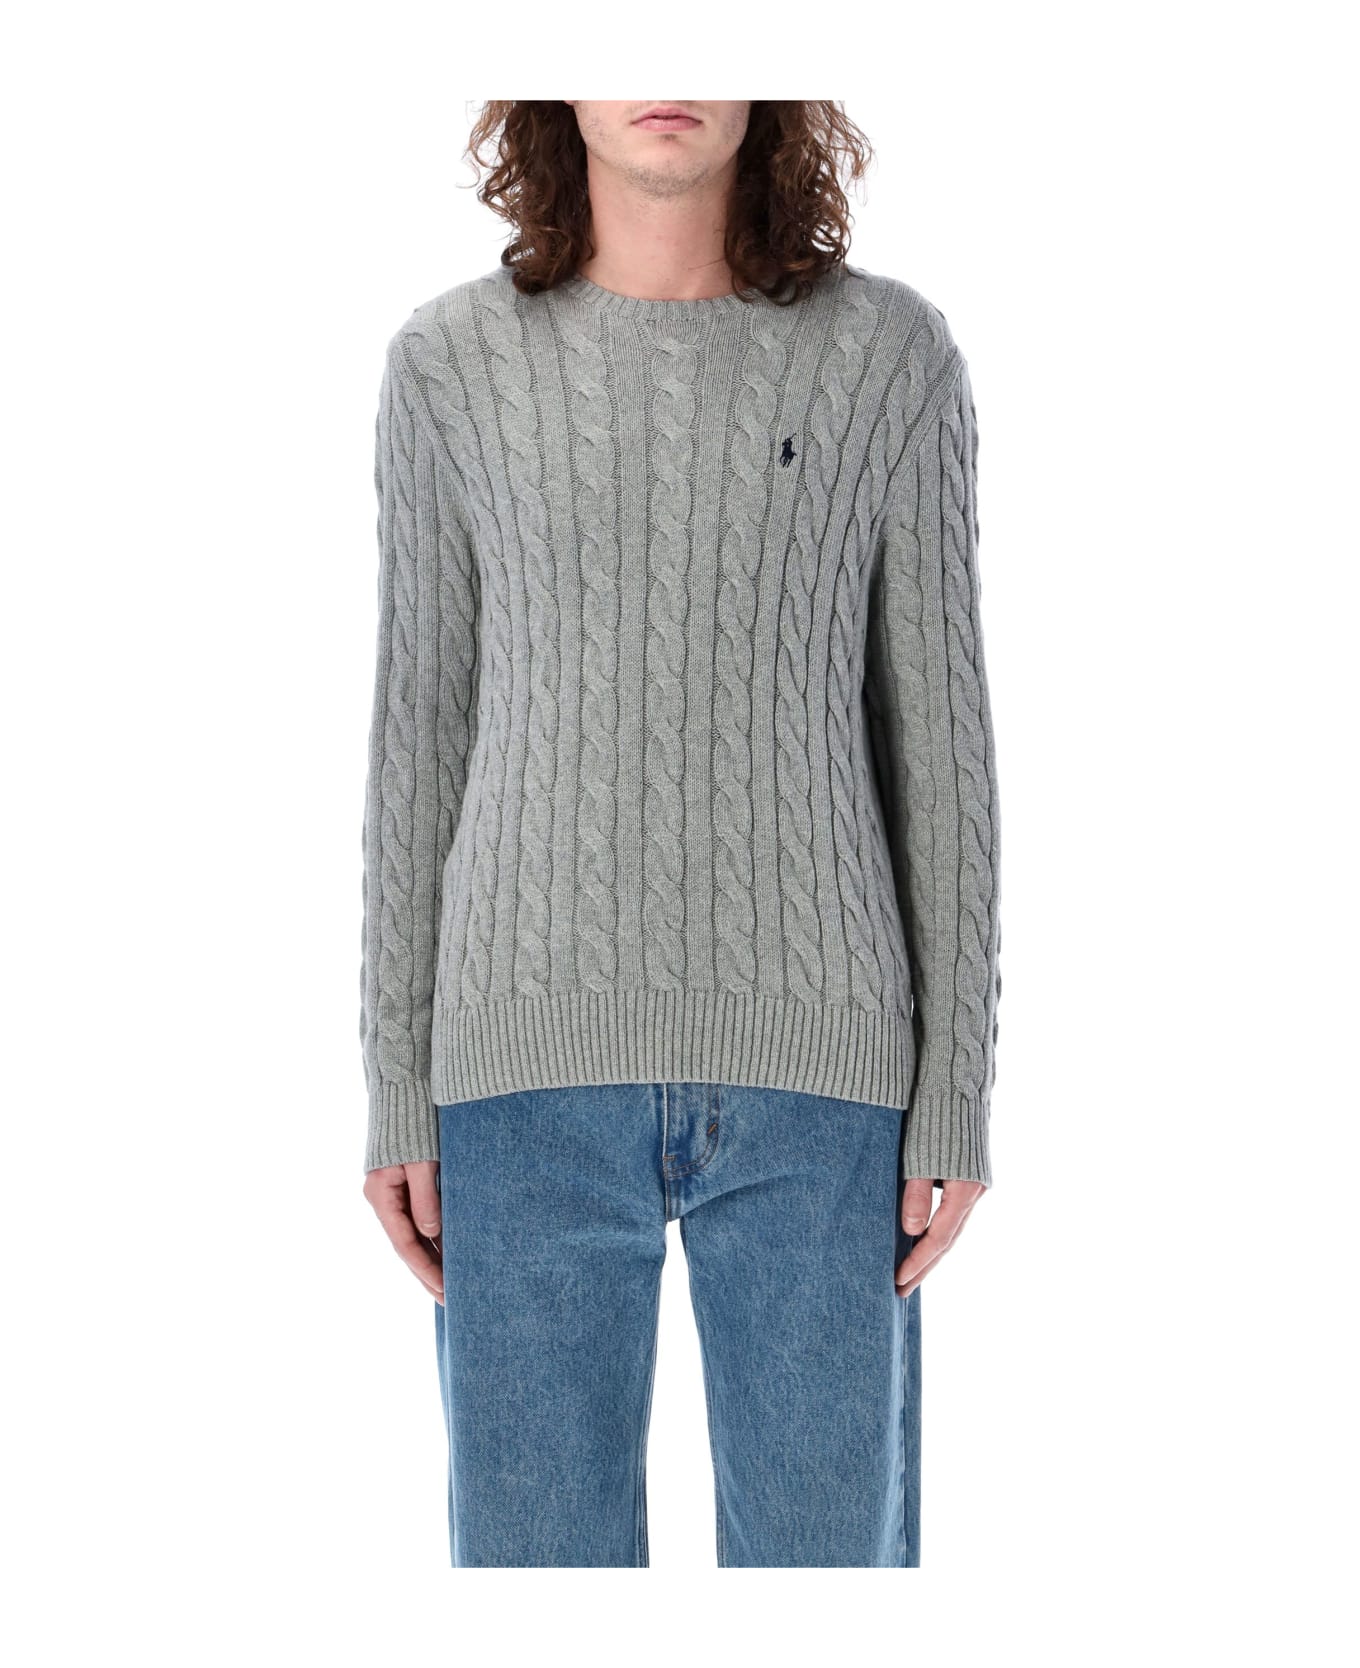 Polo Ralph Lauren Cable Knit Sweater - GREY